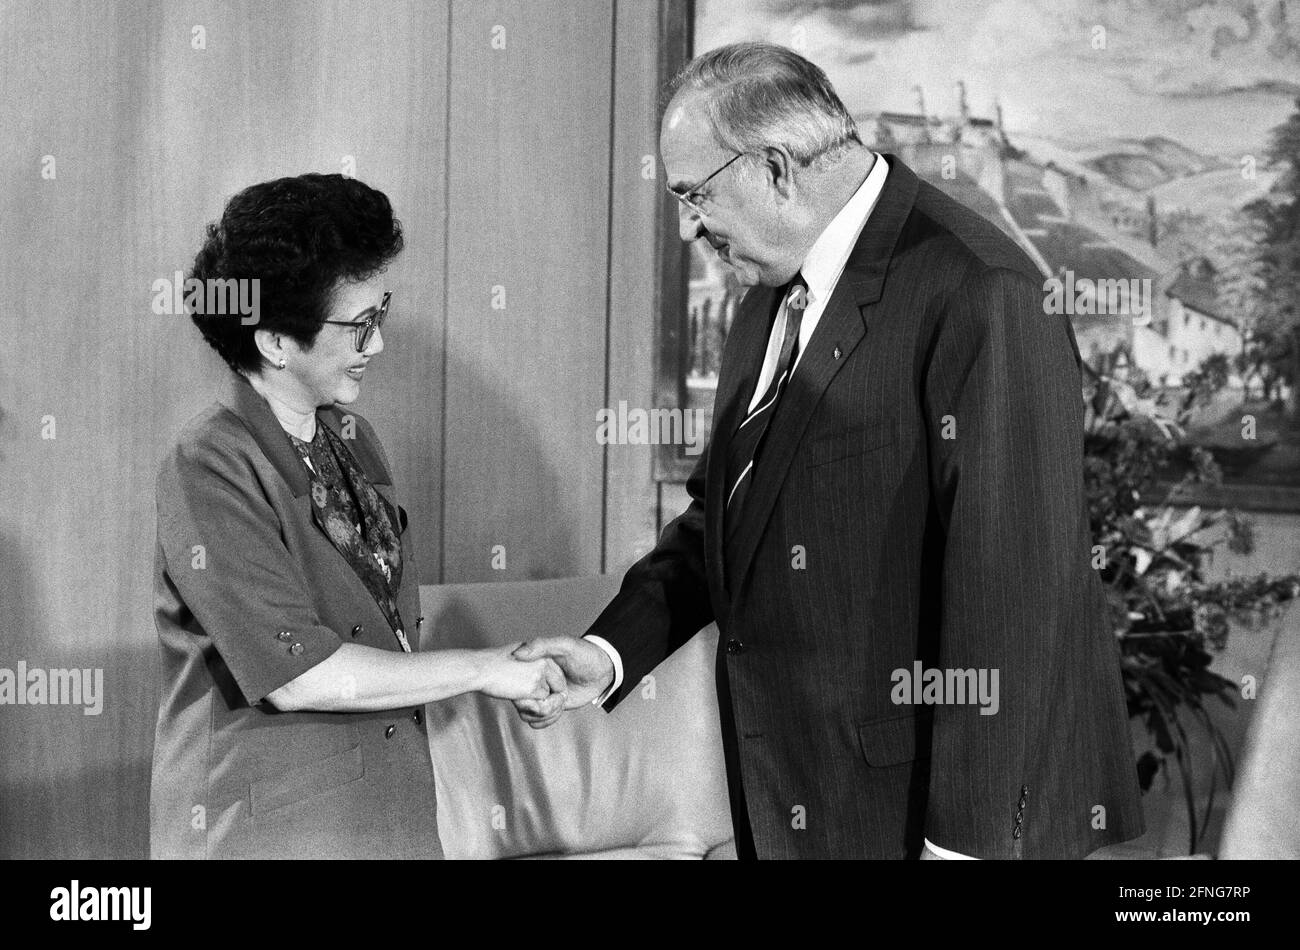 Germany, Bonn, 11.07.1989. Archive No: 07-14-03 State visit of the President of the Philippines Photo: Federal Chancellor Helmut Kohl and President Corazon Aquino [automated translation] Stock Photo